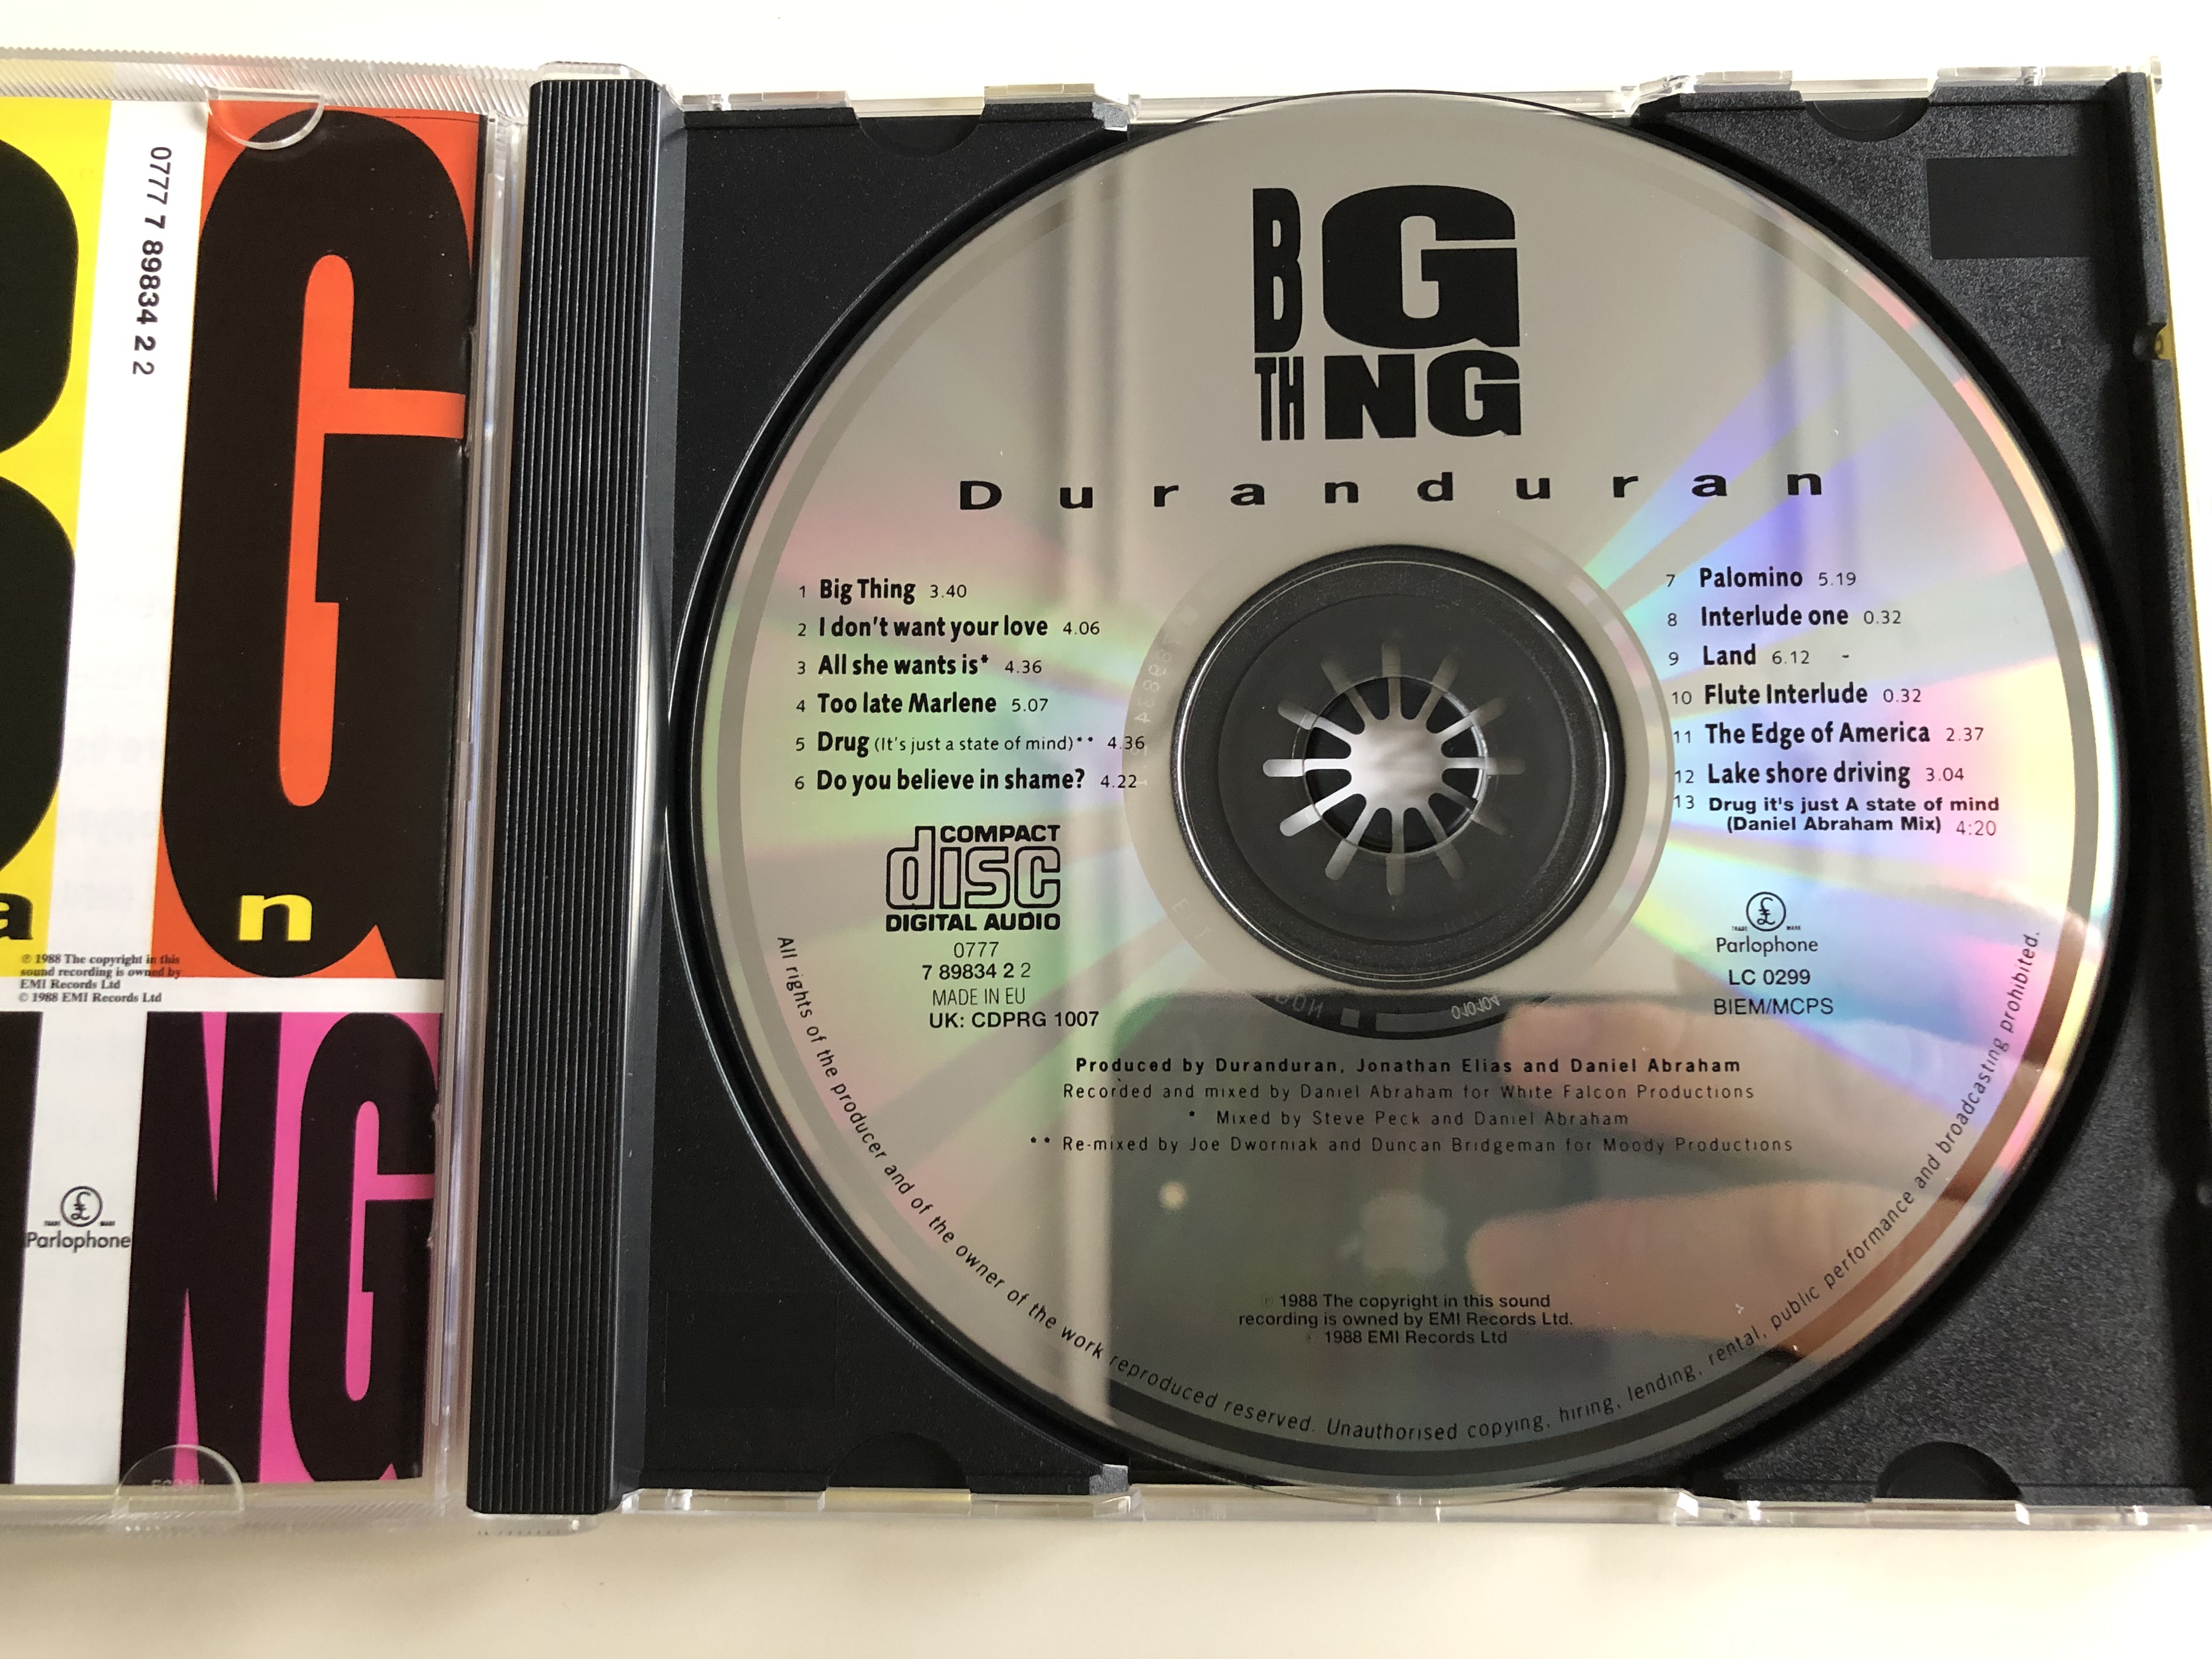 duran-duran-big-thing-too-late-marlene-drug-do-you-believe-in-shame-the-edge-of-america-cdprg-1007-audio-cd-recording-from-1988-emi-records-2-.jpg